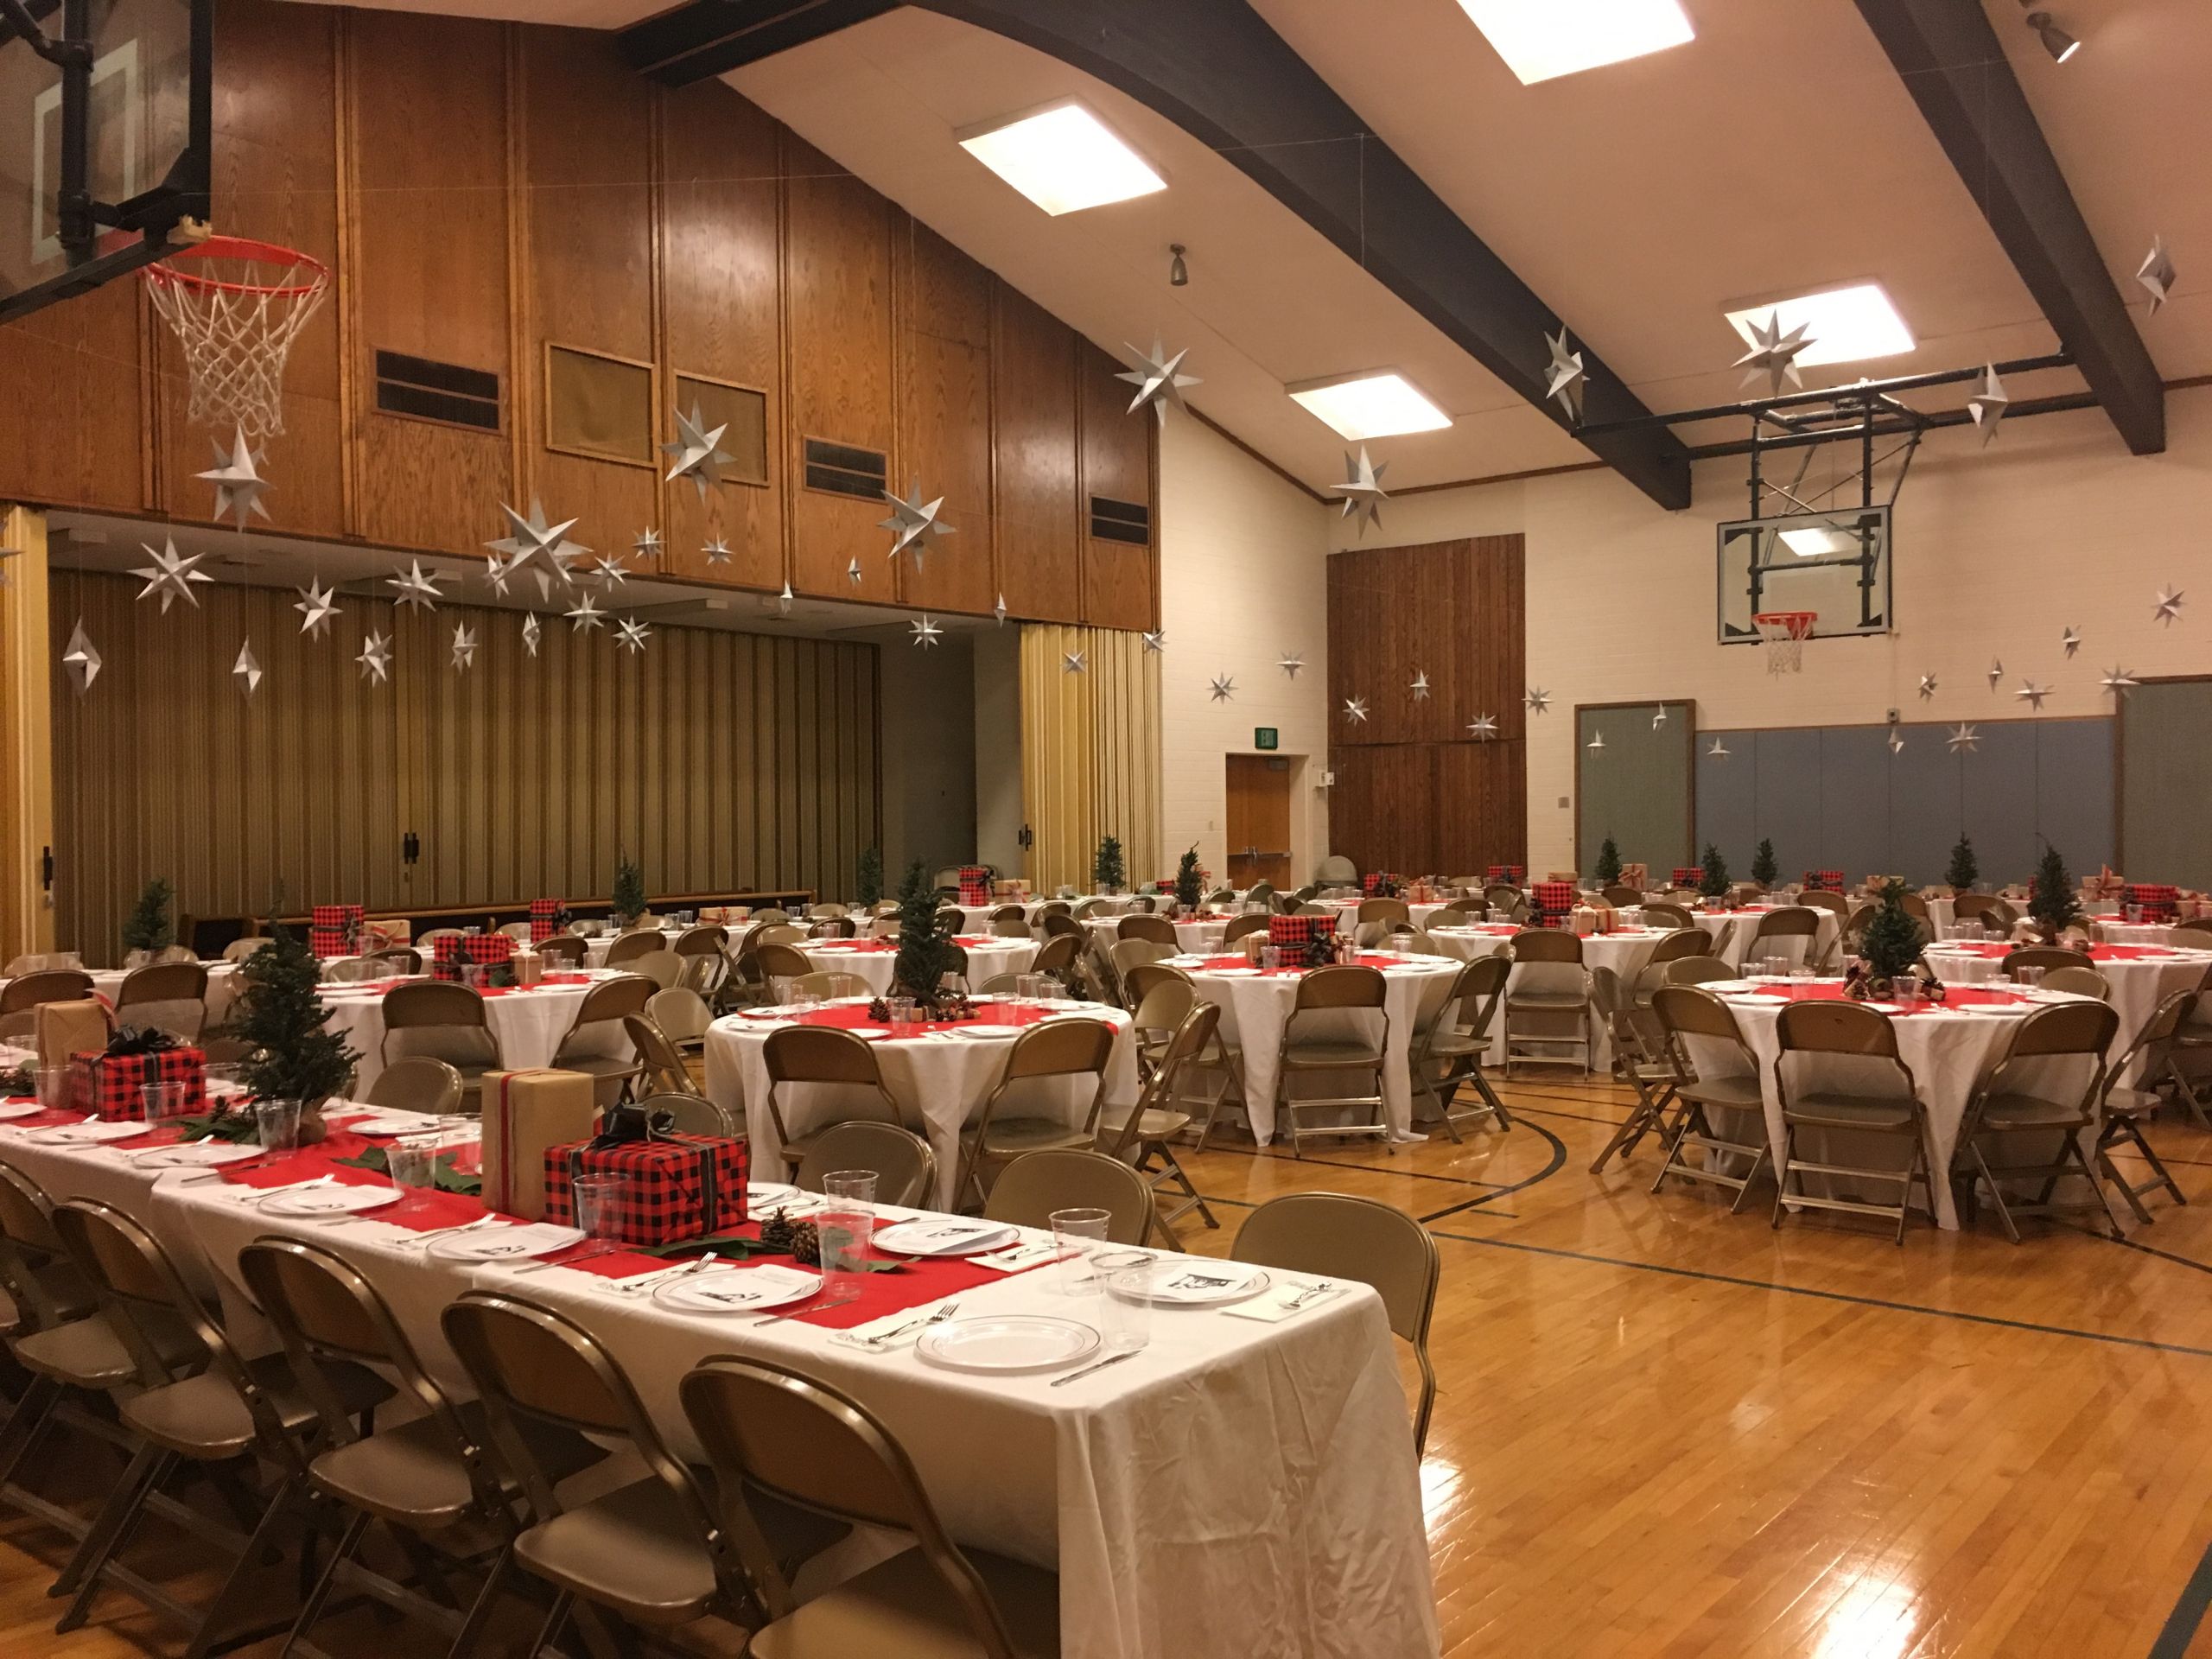 Lds Christmas Party Ideas
 "Picture A Christmas" Church Christmas Program Details